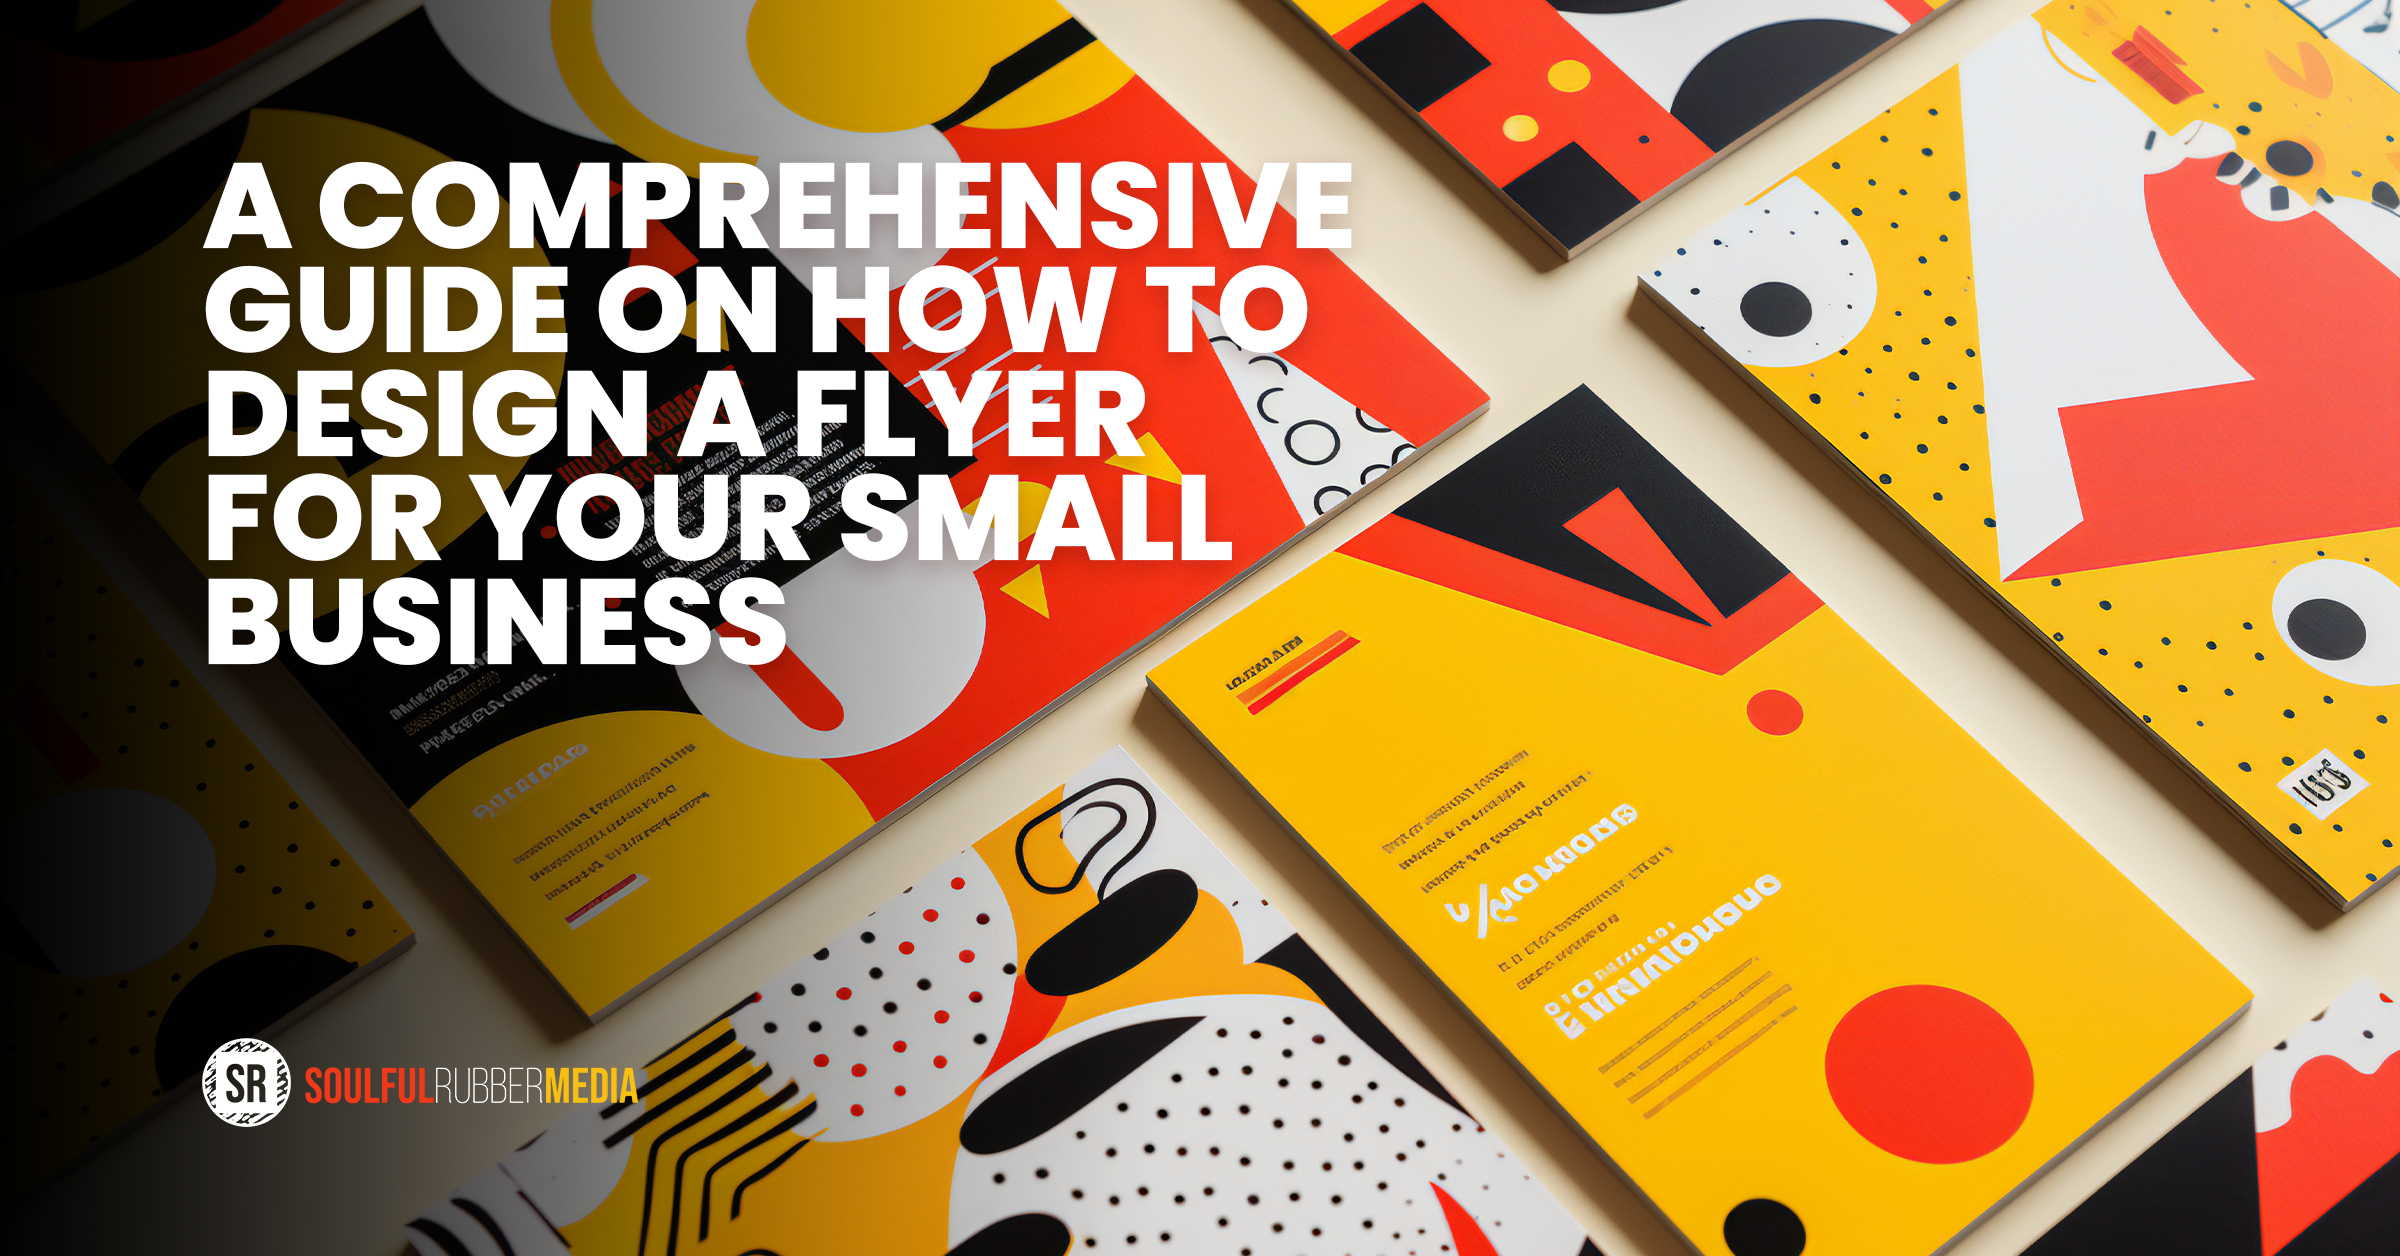 A Comprehensive Guide on How to Design a Flyer for your Small Business